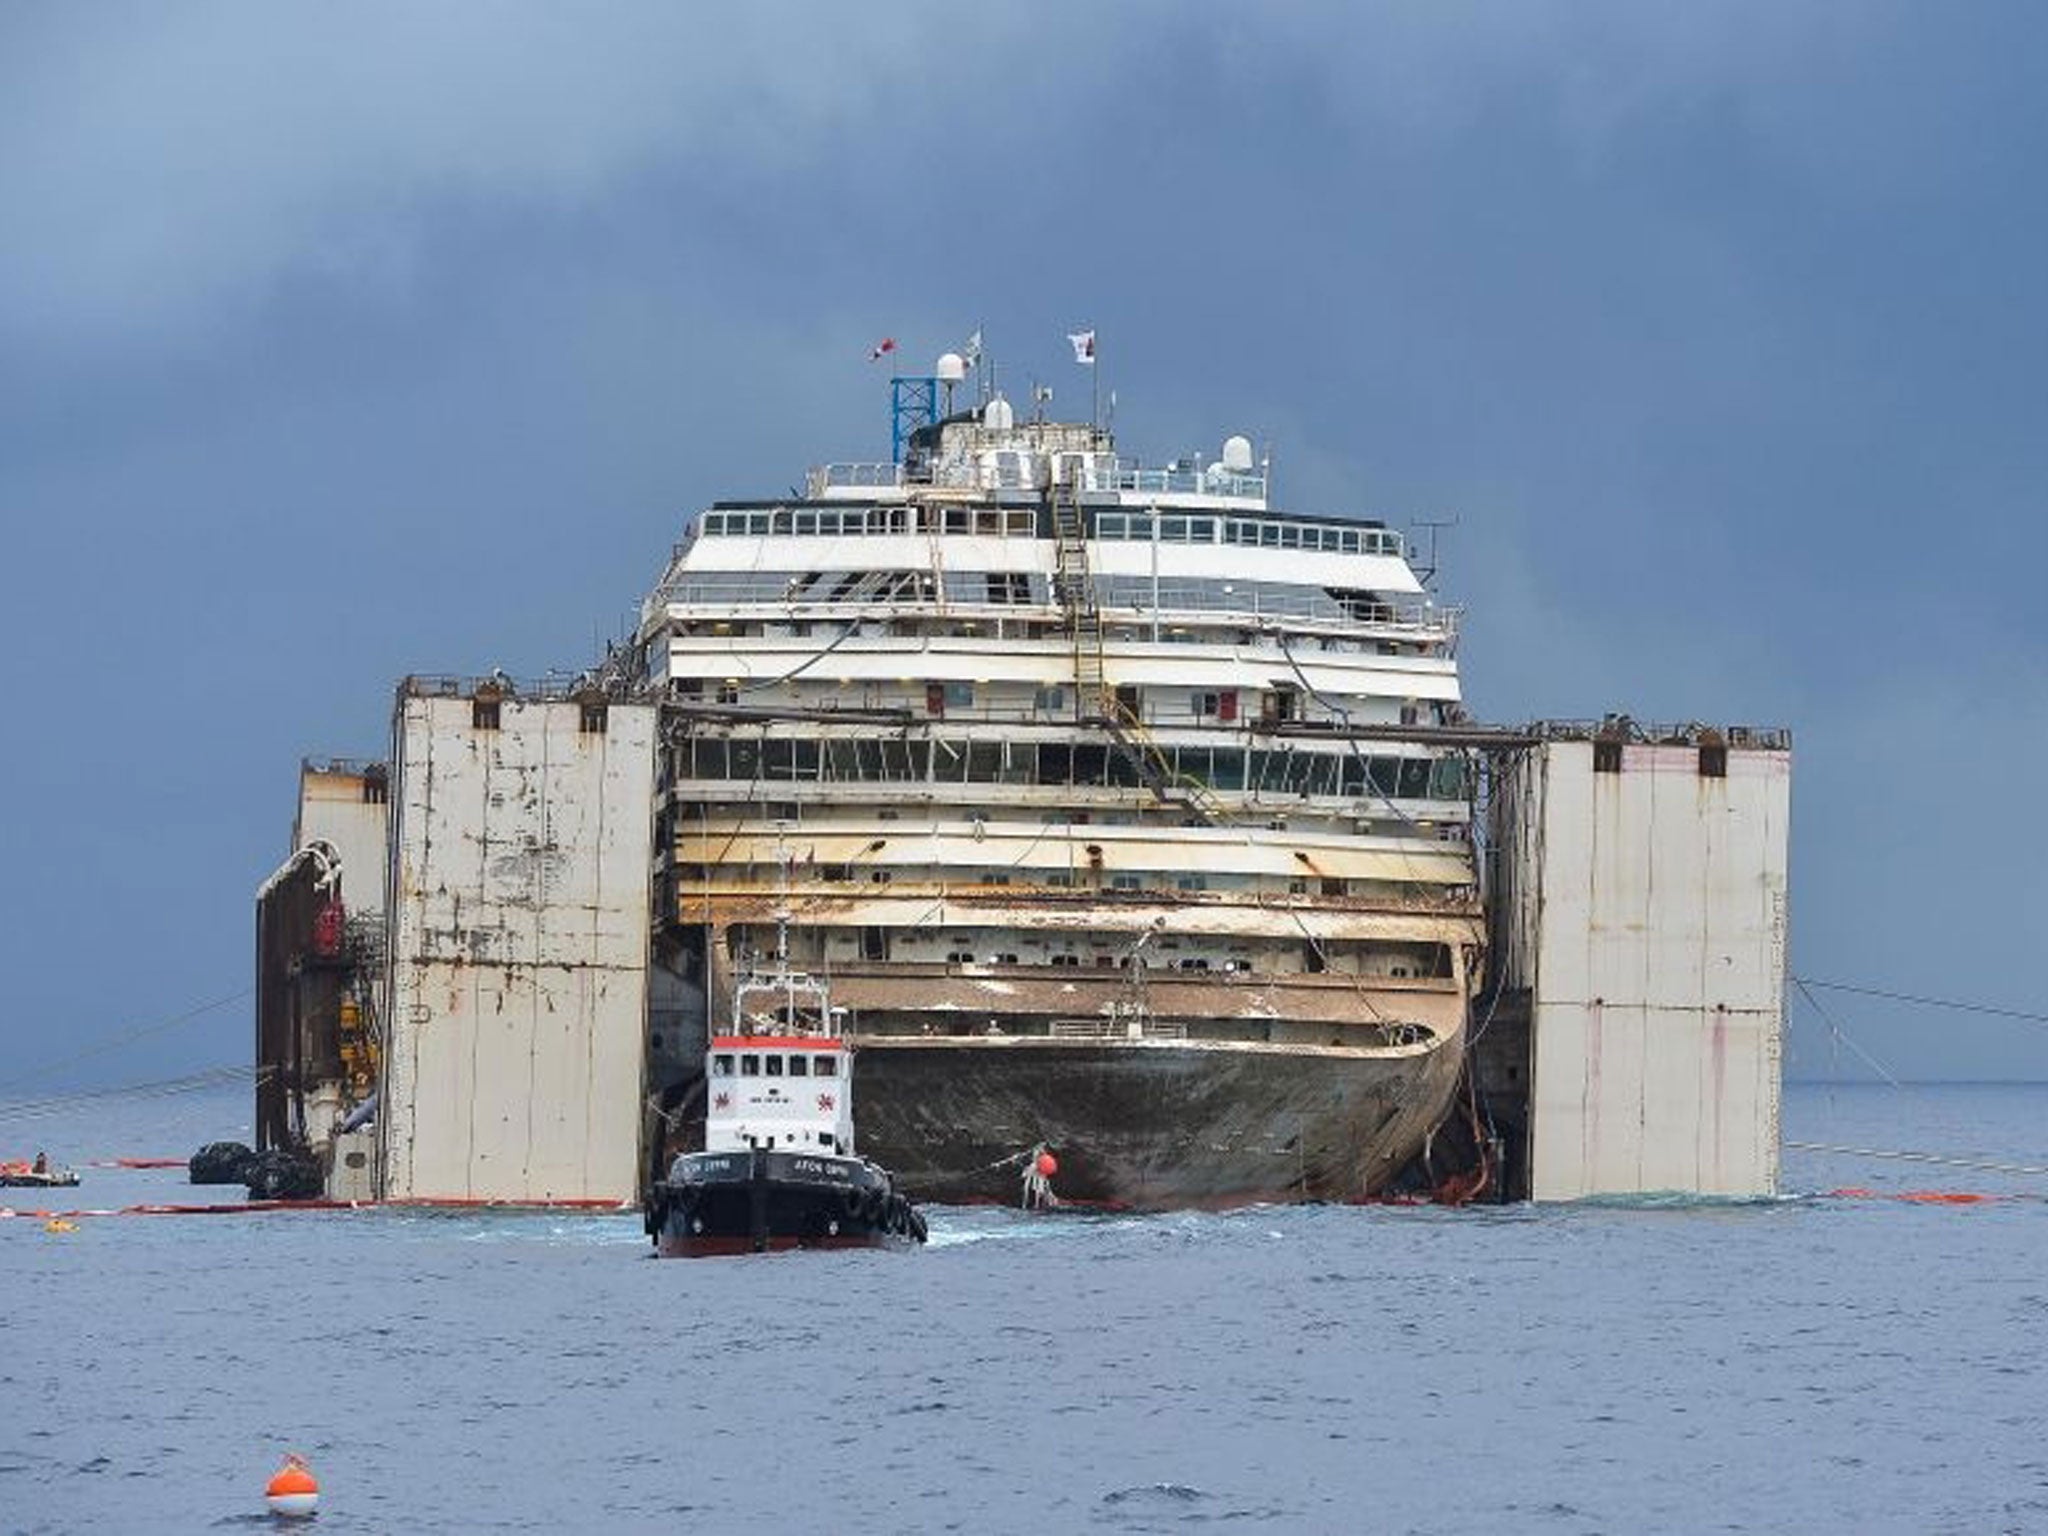 The Costa Concordia cruise ship after being refloated using air tanks attached to its sides on July 22, 2014 at Giglio Island.